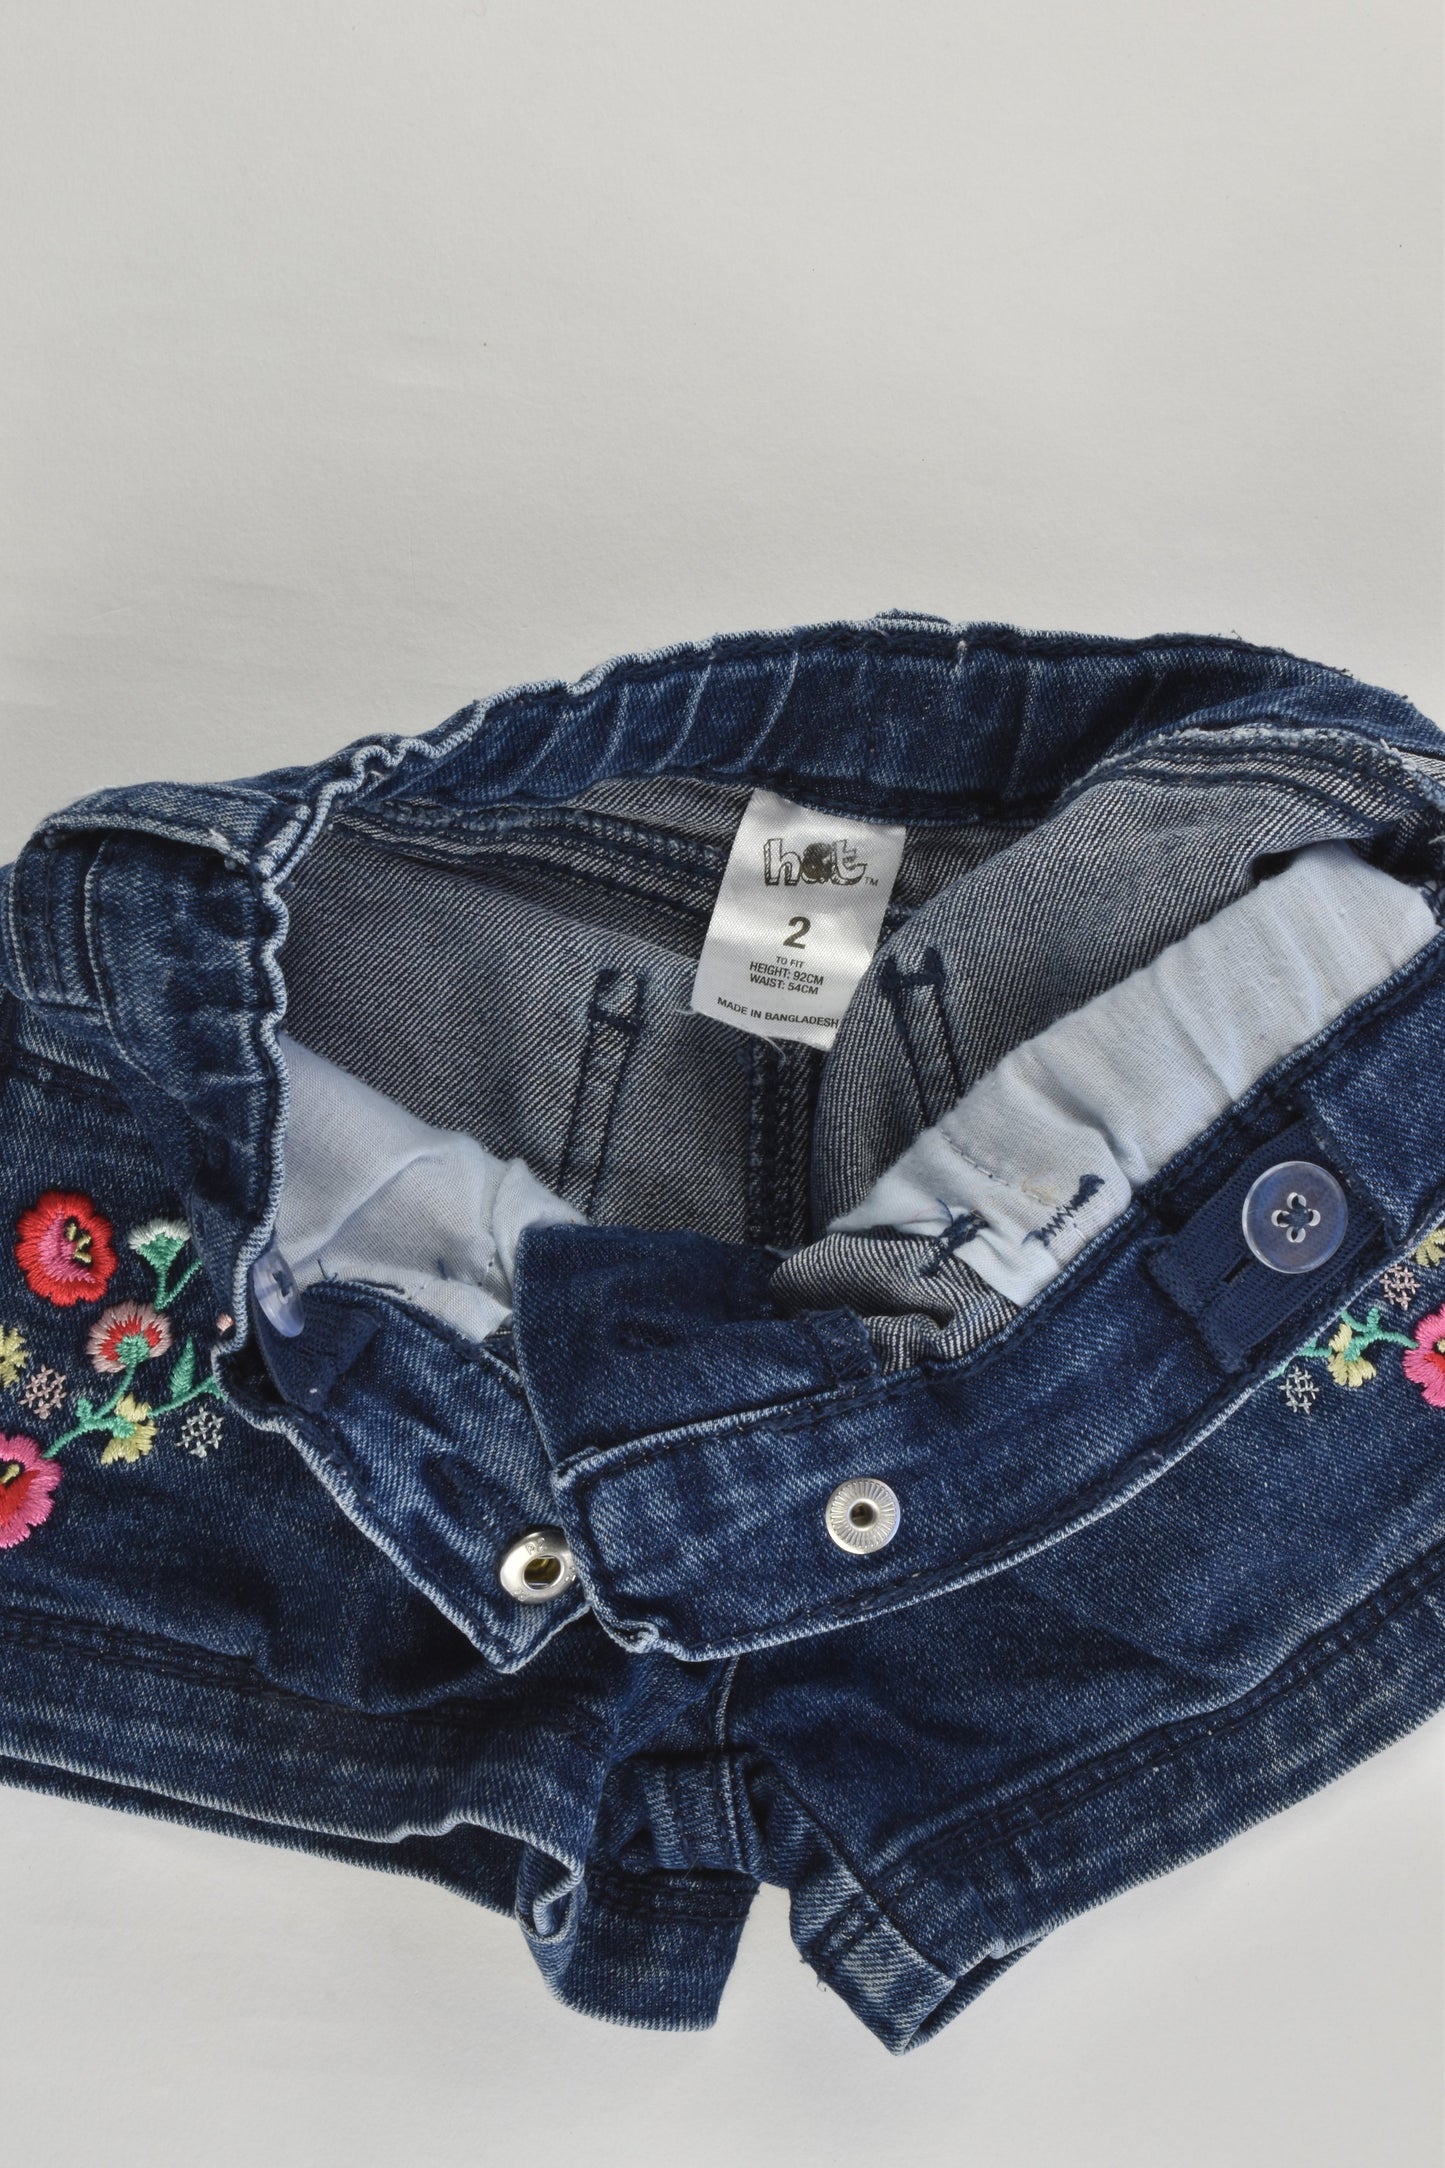 H&T Size 2 Stretchy Denim Shorts with Floral Embroidery